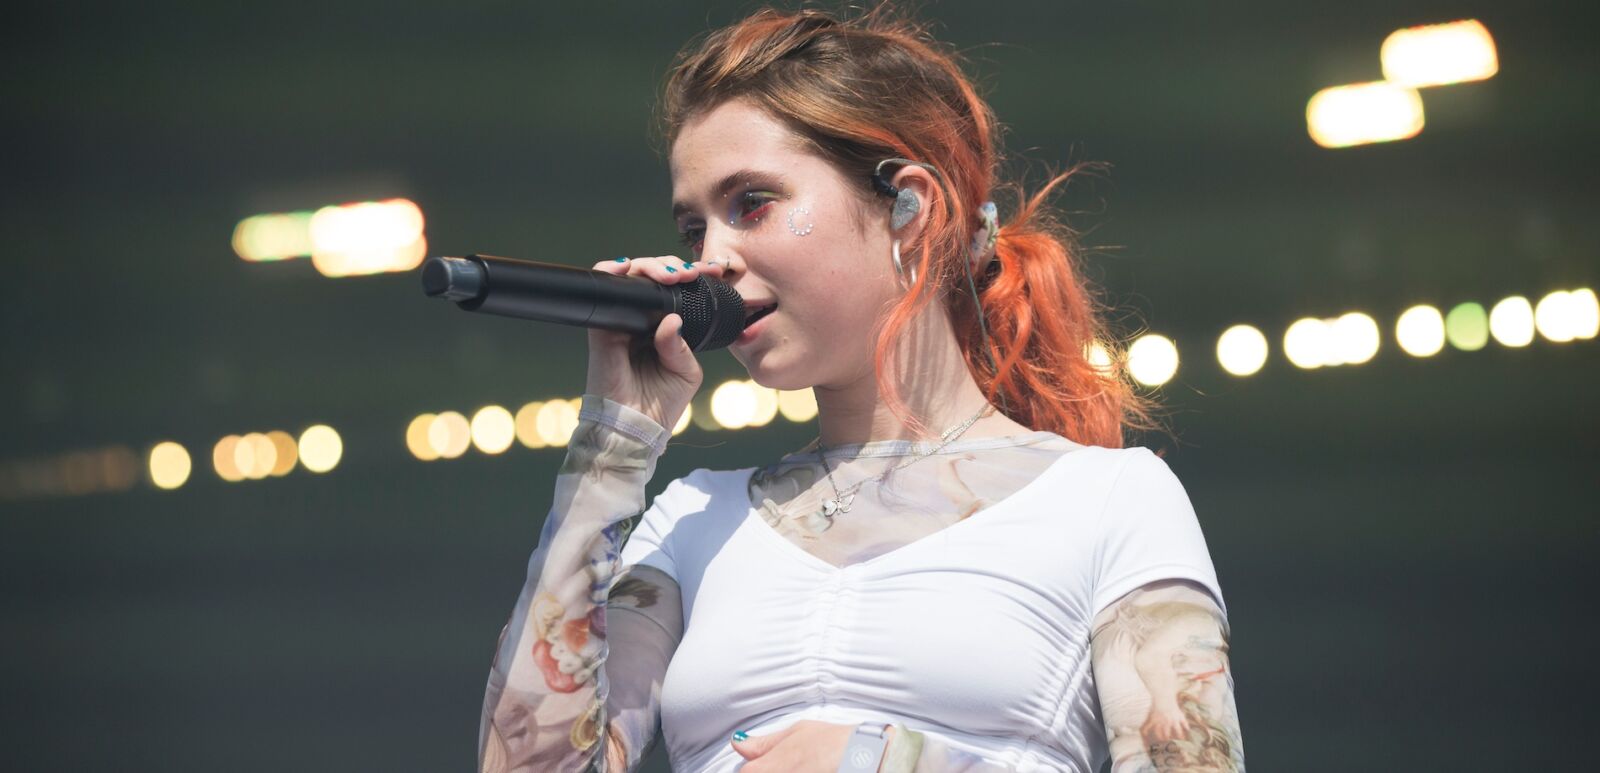 Claire Cottrill aka Clairo sings at Pitchfork Music Festival. Her fame escalated after releasing "Pretty Girl" (2017), a lo-fi-produced song that attracted millions of views. Photo by Shutterstock.